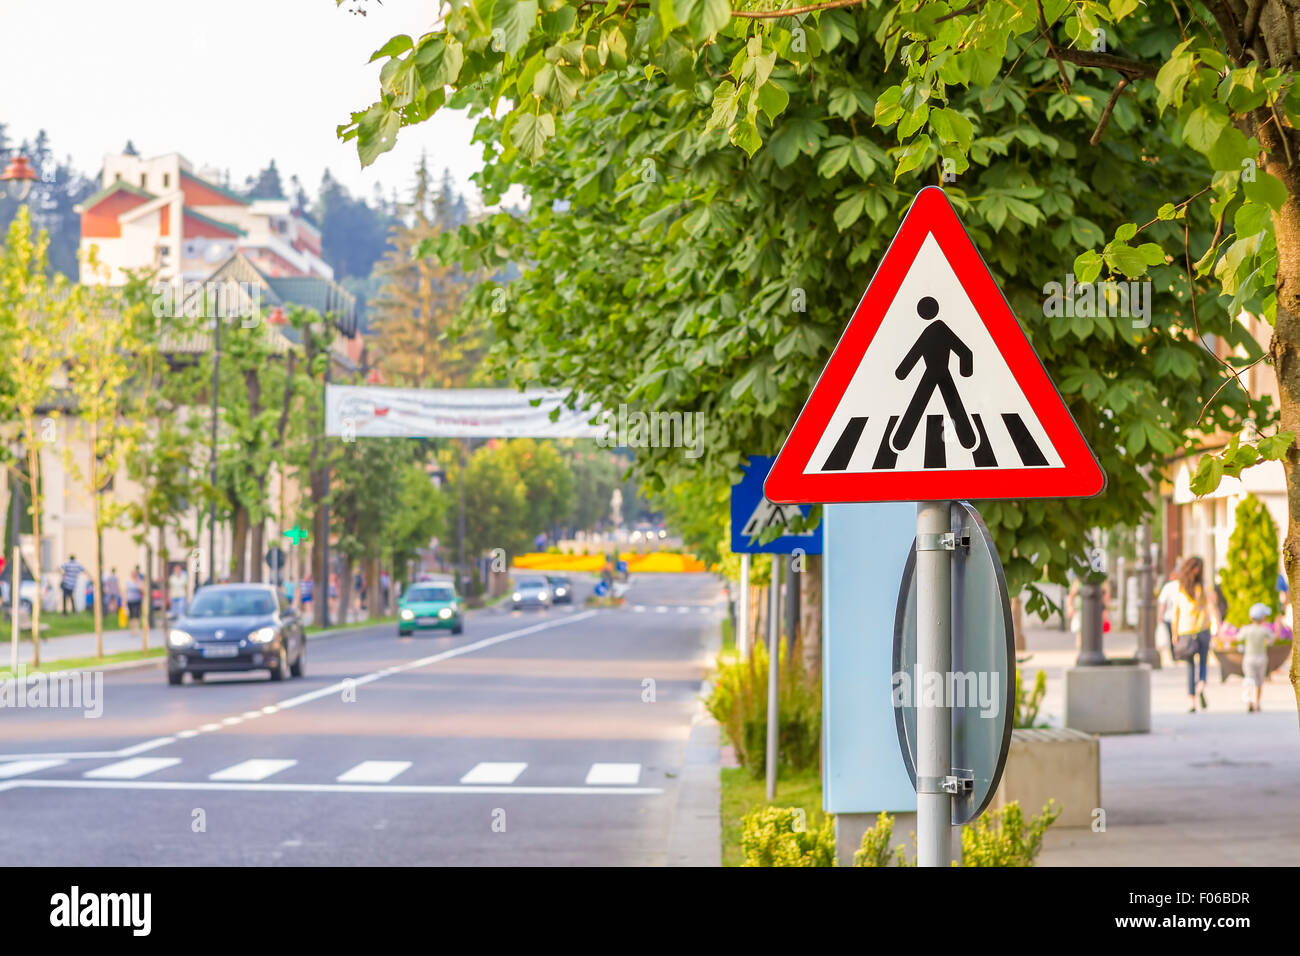 Pedestrian crossing traffic sign Stock Vector Images - Alamy